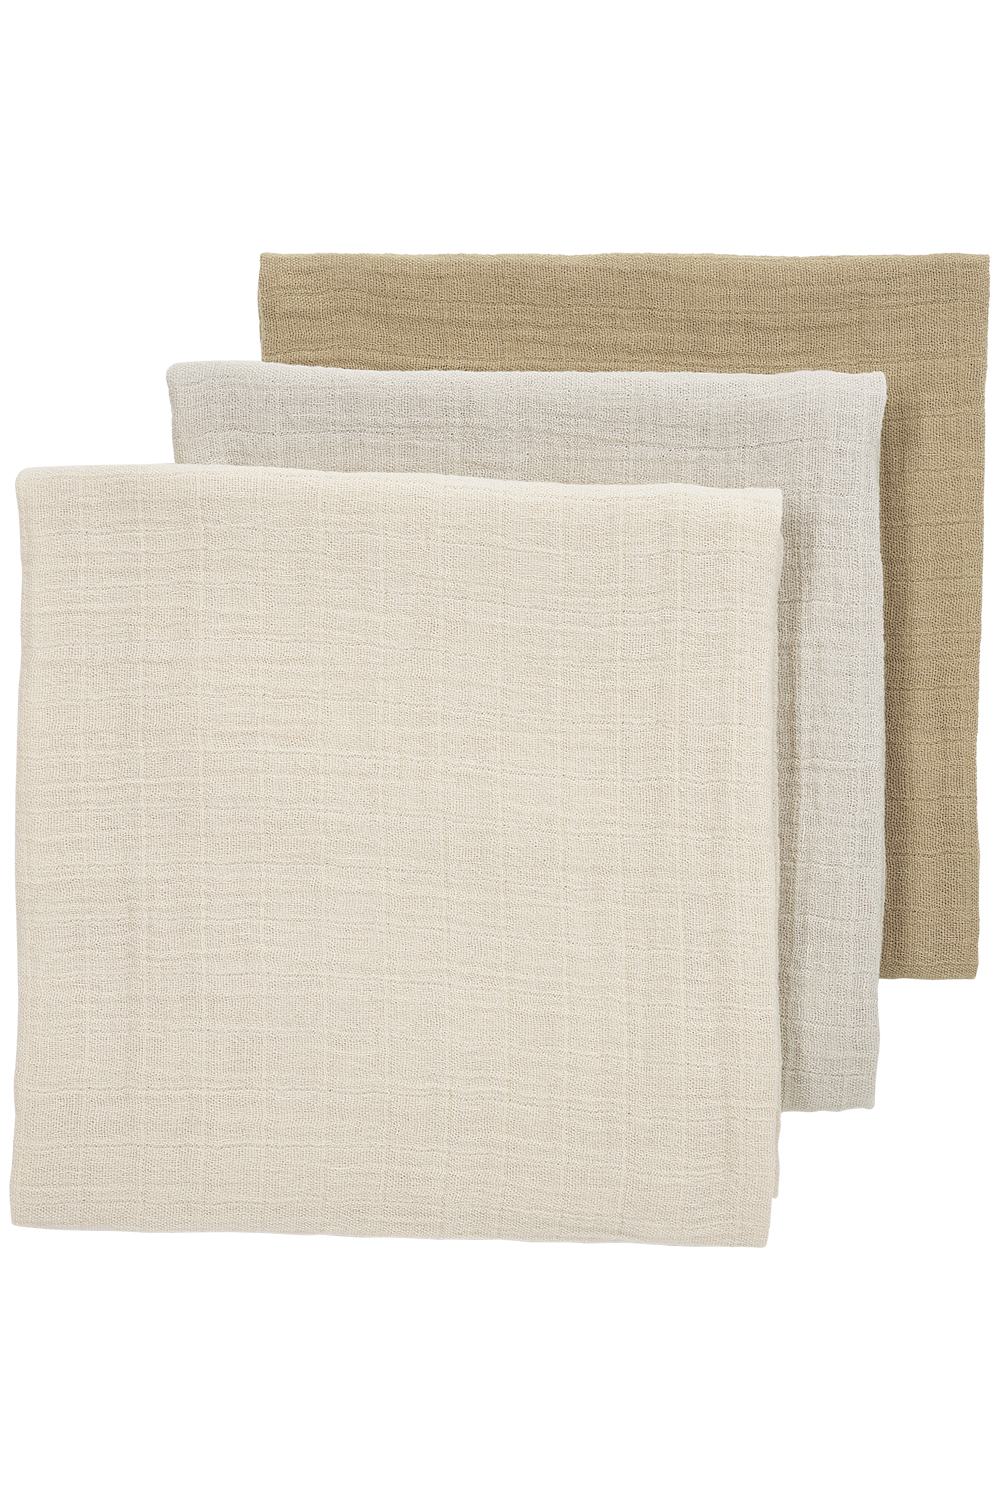 Pre-washed muslin squares 3-pack Uni - soft sand/greige/taupe - 70x70cm